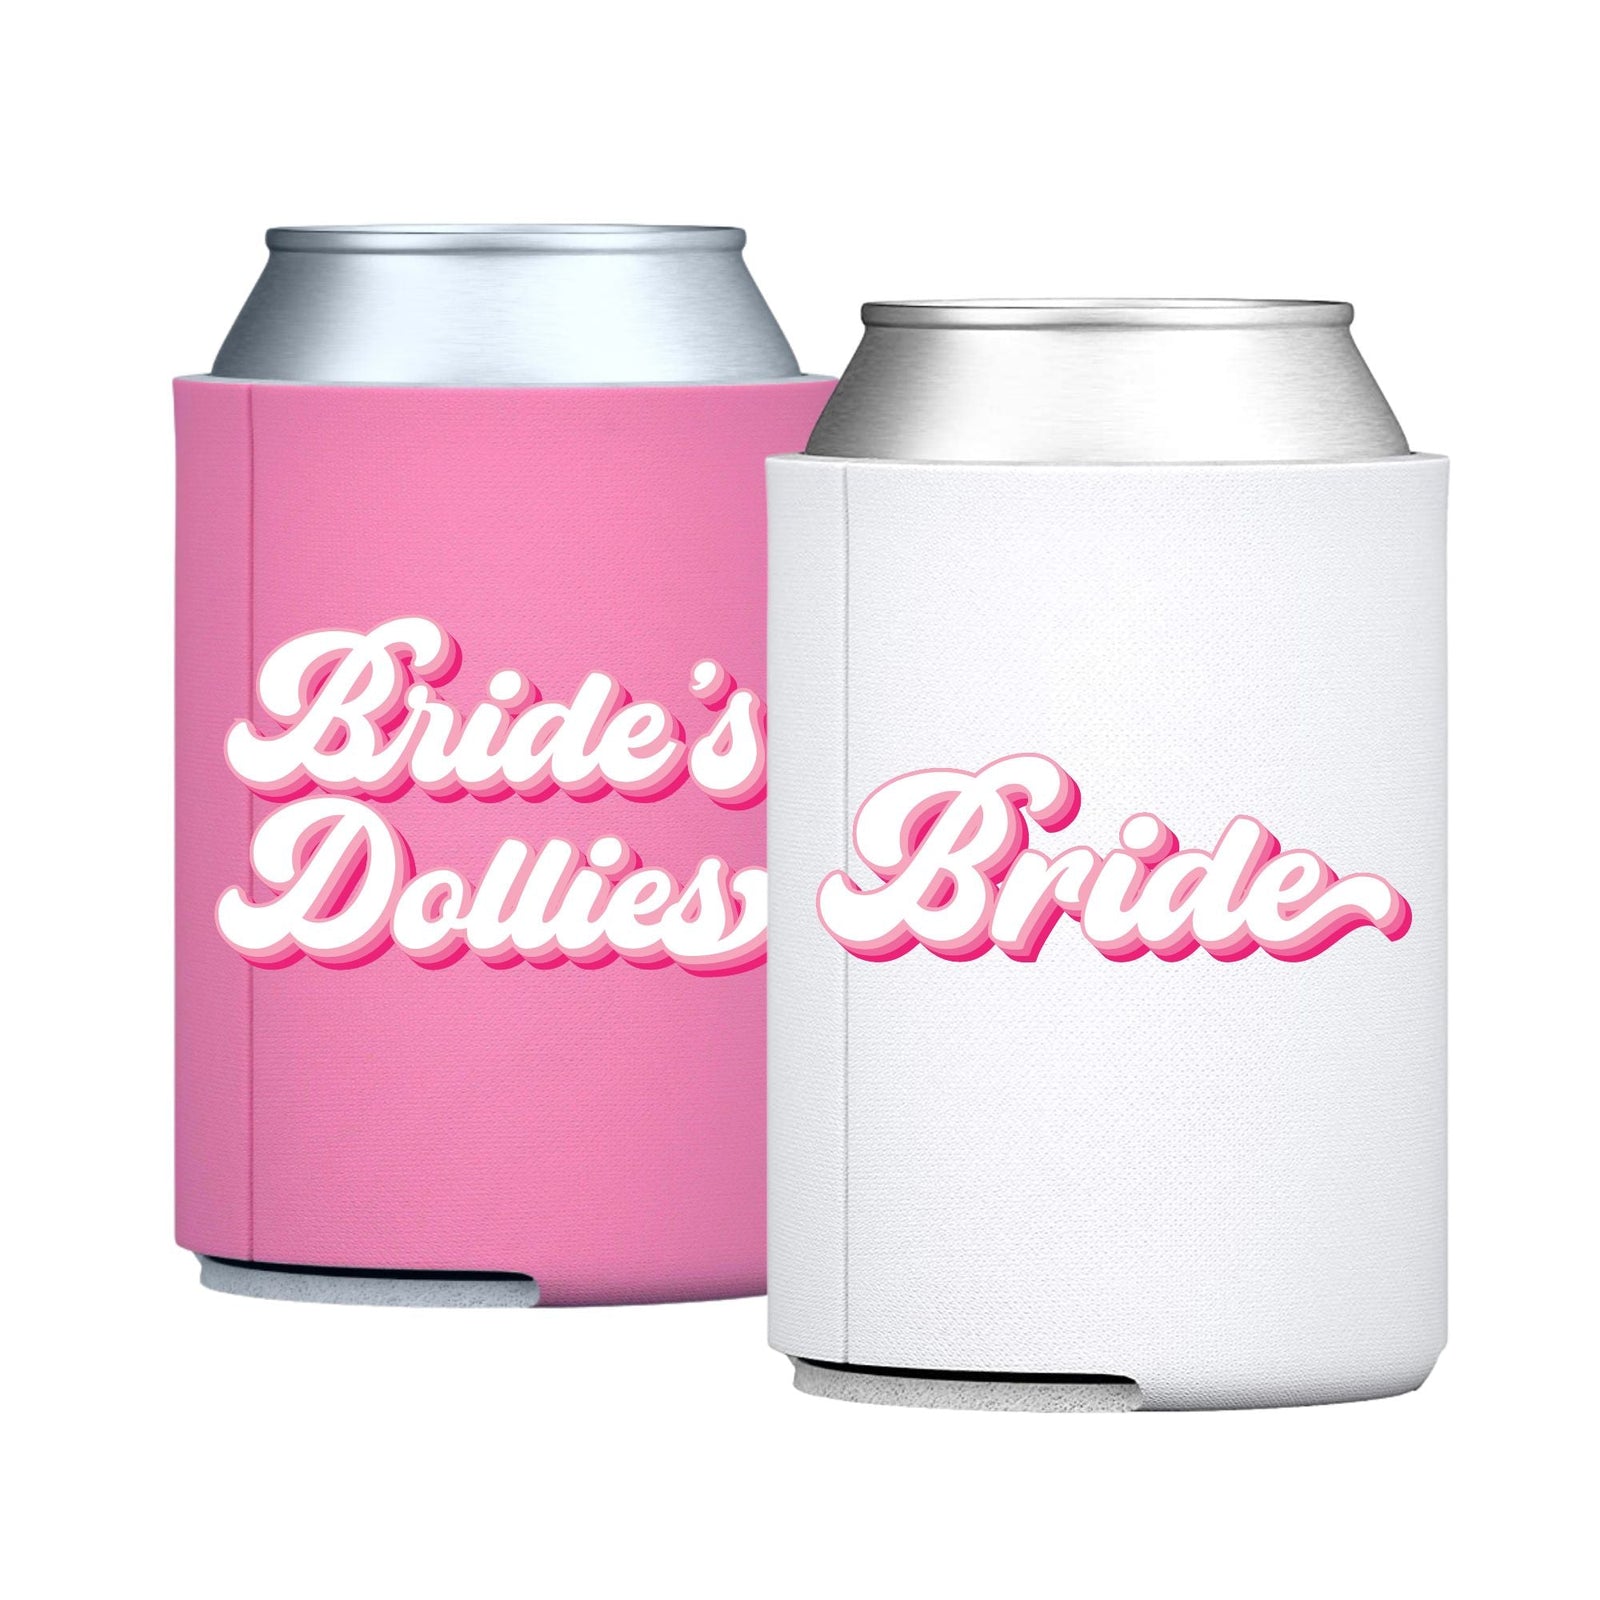 Two Brides Are Better Can Cooler - Sprinkled With Pink